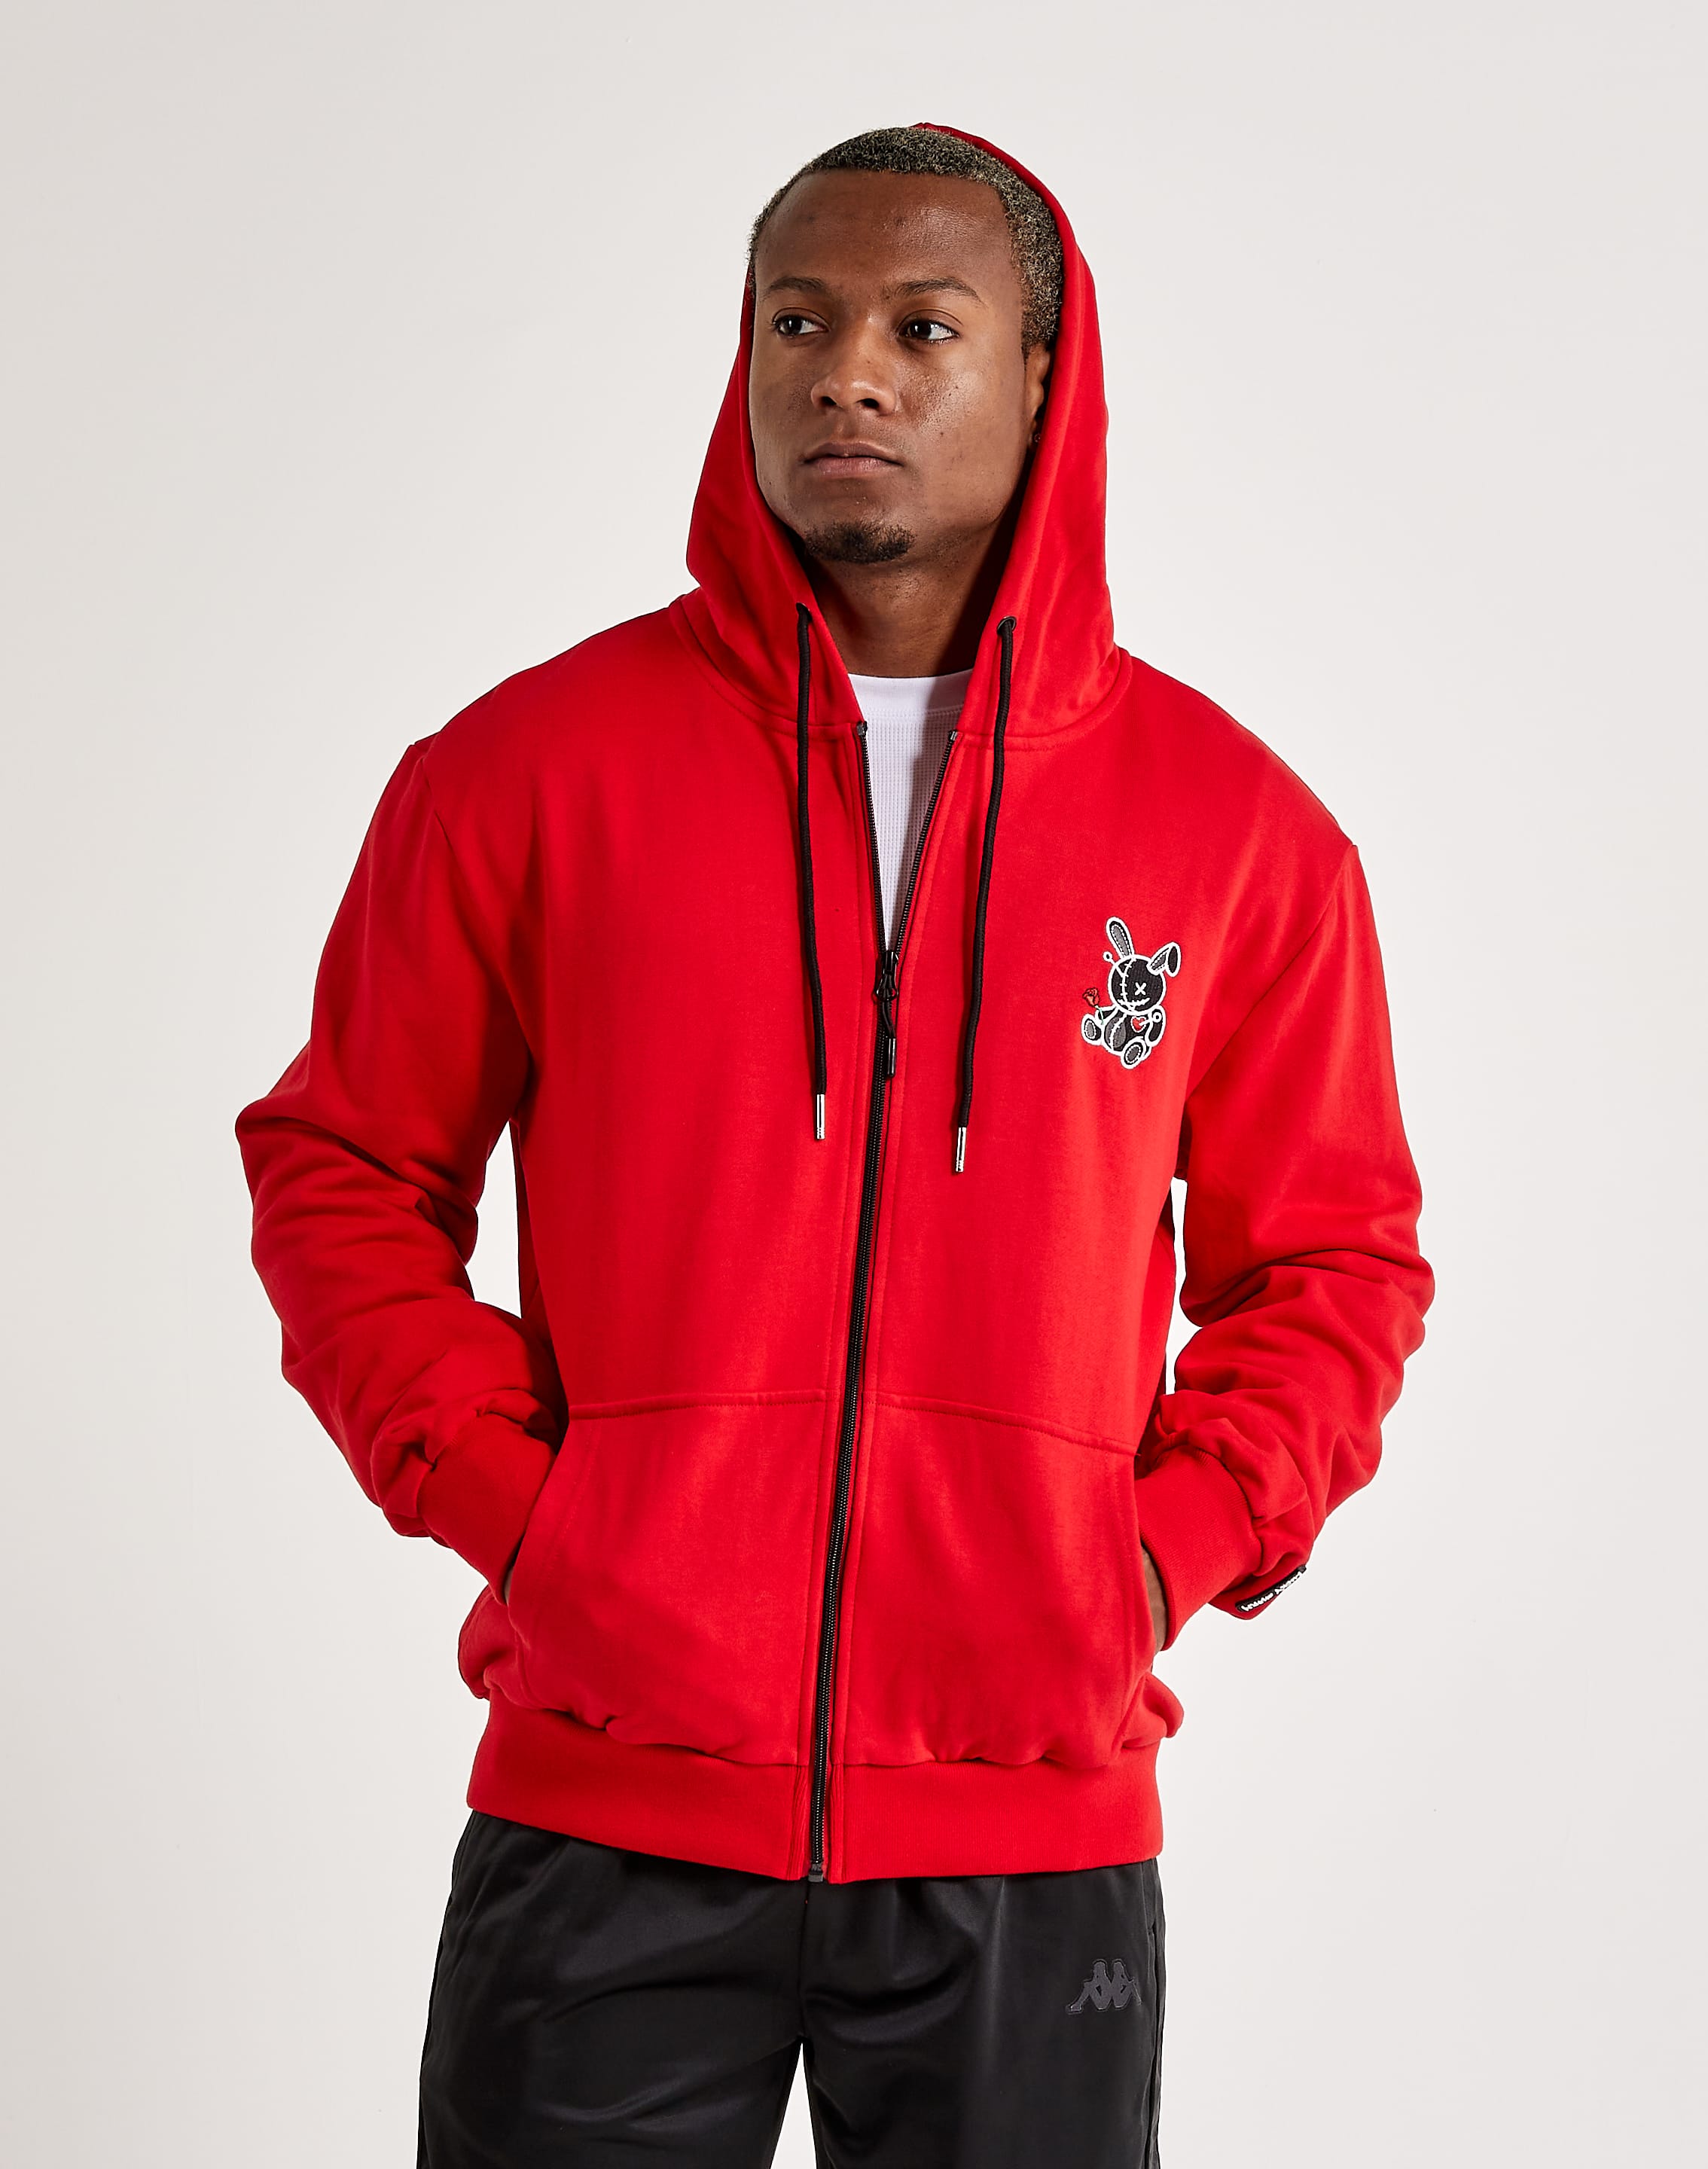 BKYS Lucky Charm Star Zip-Up Hoodie – DTLR